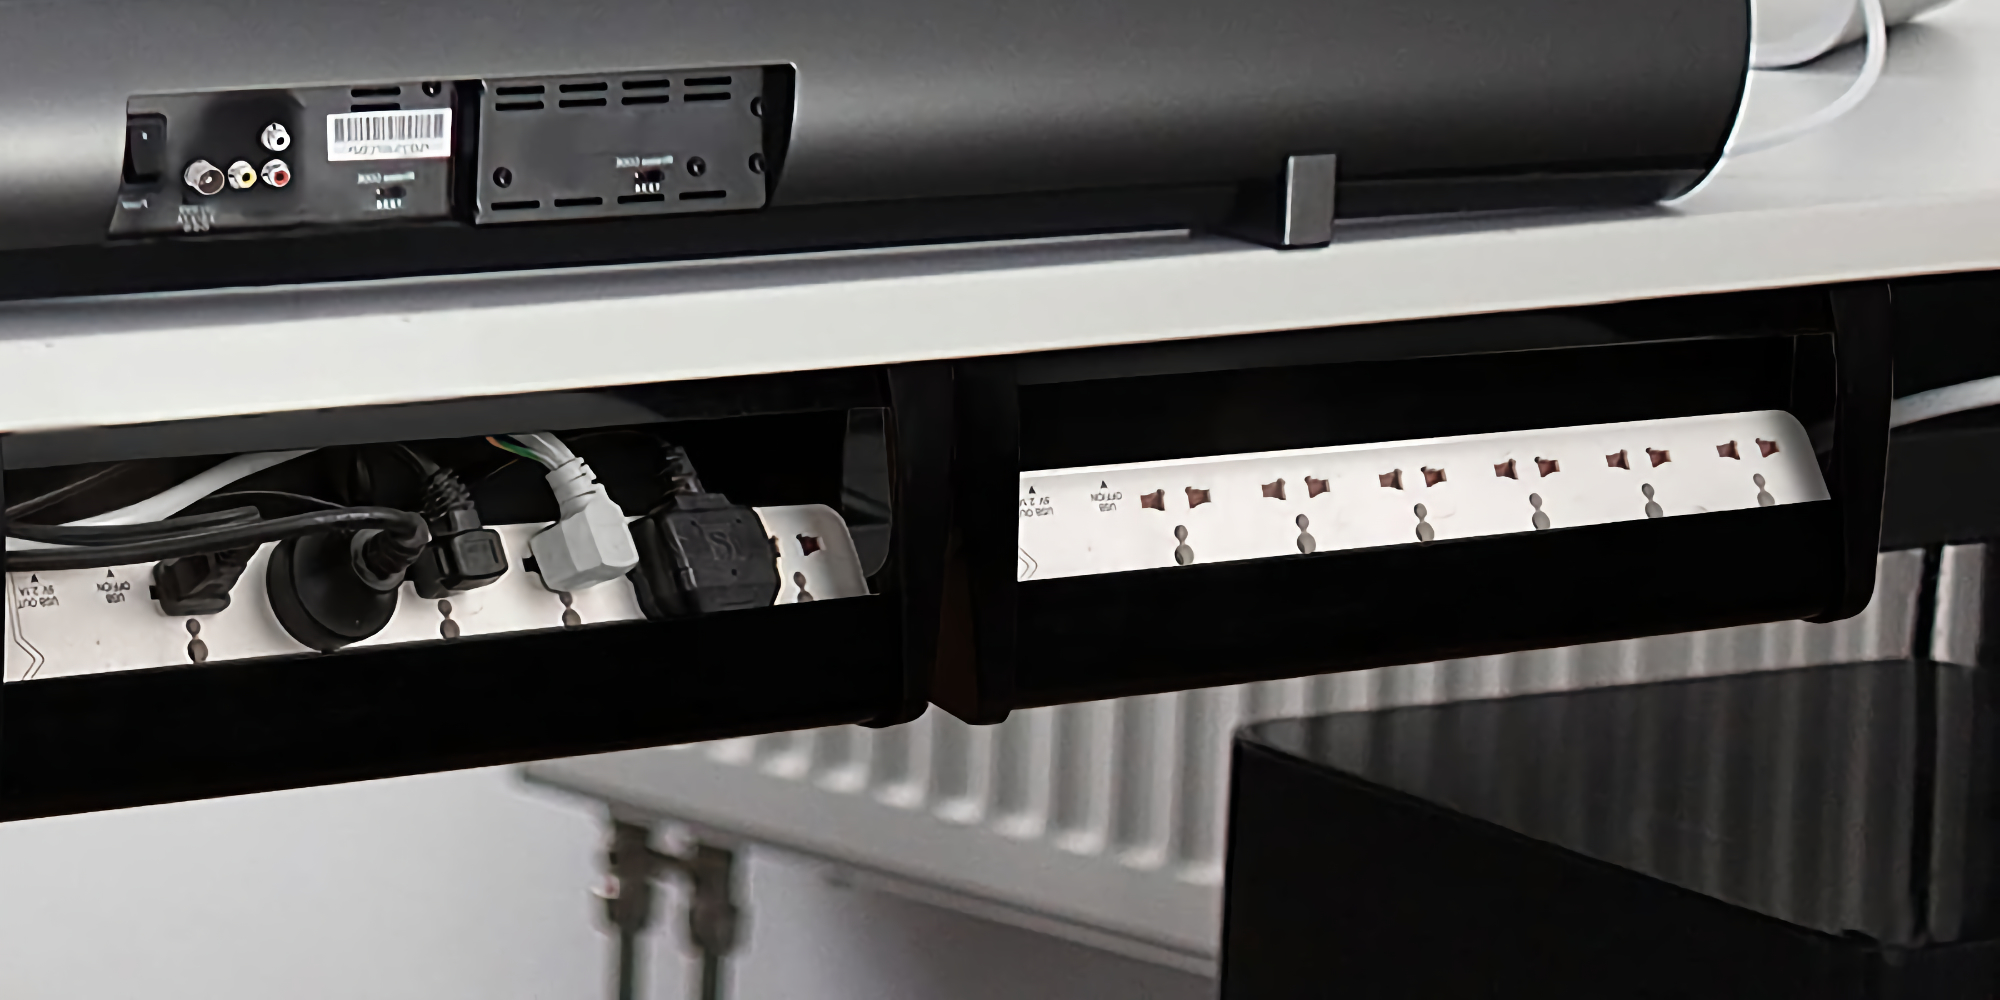 Tidy up power strips, cords, and more with this under-desk cable